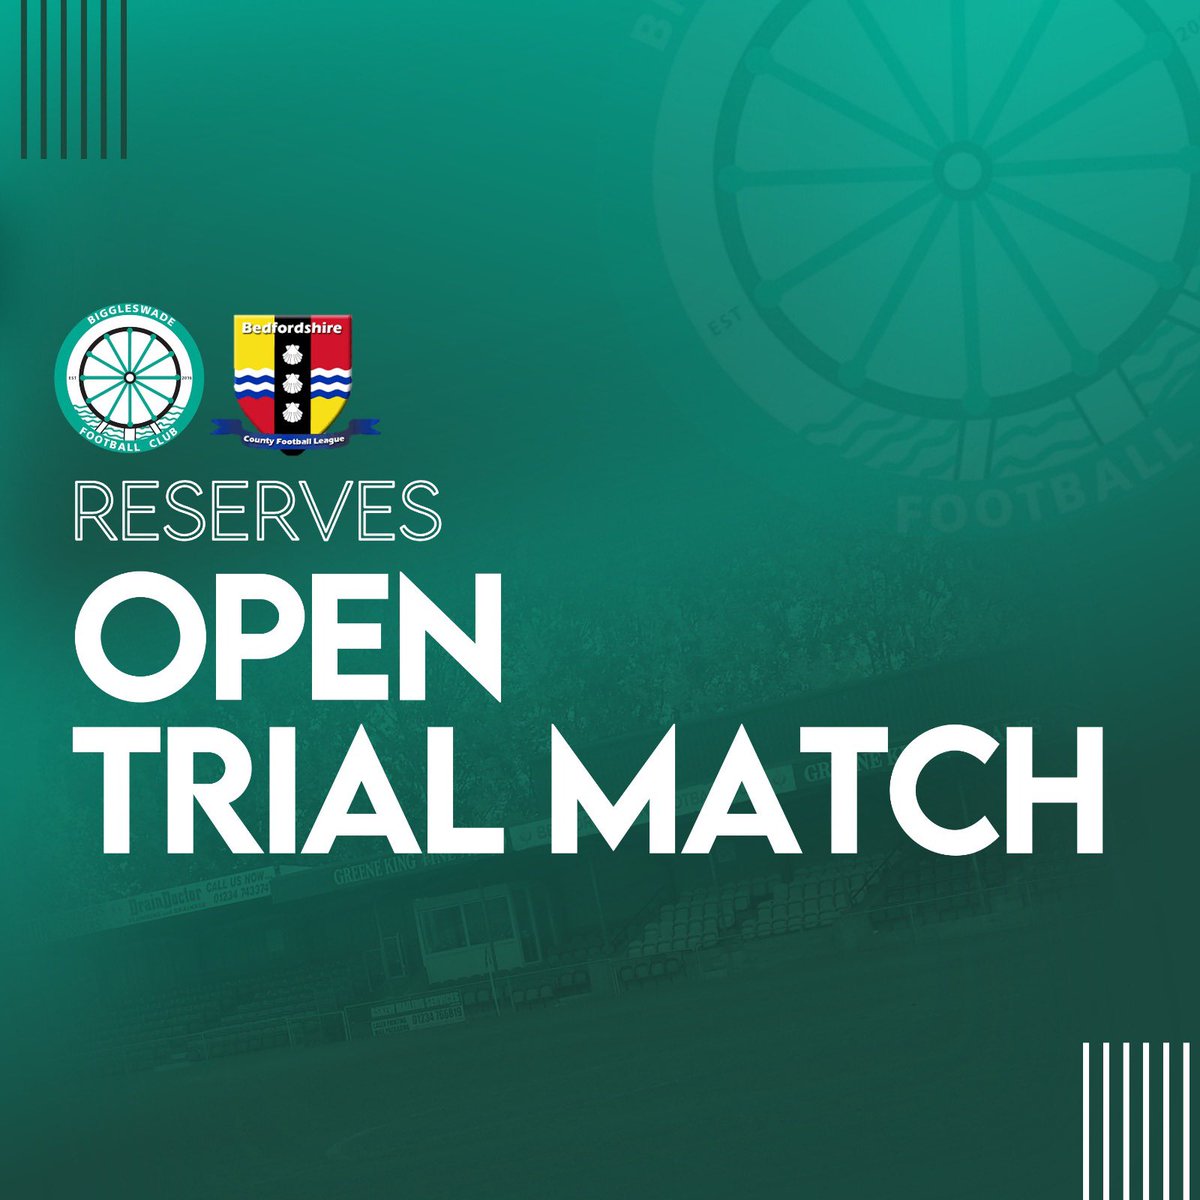 THURSDAY NIGHT | 💚⚽️📆 Last chance to register for Thursday night’s open trial match at Cranfield 3G pavilion. Email the club ASAP (BiggleswadeFC@outlook.com) to book your place. #WeAreFC | @phil291